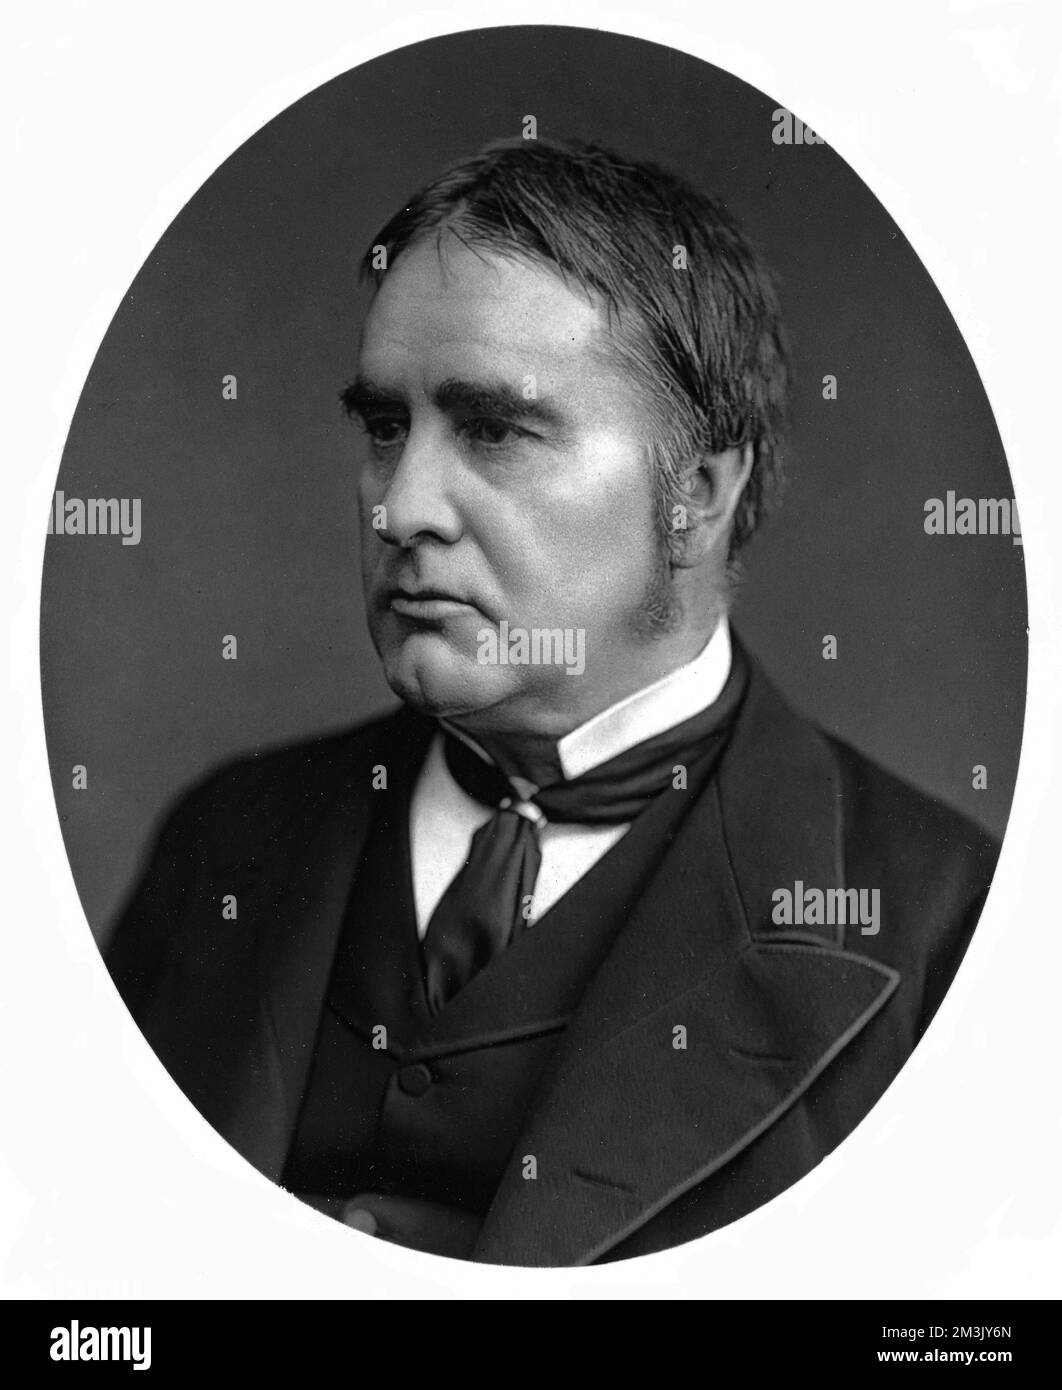 Sir William Gull (1816 - 1890), studied medicine at St Guy's in London. In 1872 Gull was made a Baronet and became physician to Queen Victoria, treating the Prince of Wales for typhoid.   In 1876 he was involved with the infamous Bravo poisoning trial.  He died in 1890, but immediately came under suspicion as the death certificate was signed by his brother-in-law, which was not usual medical practice. A medium trying to track down 'Jack the Ripper', alleged that Gull was still alive and had been certified insane, under a different name.  1877 Stock Photo